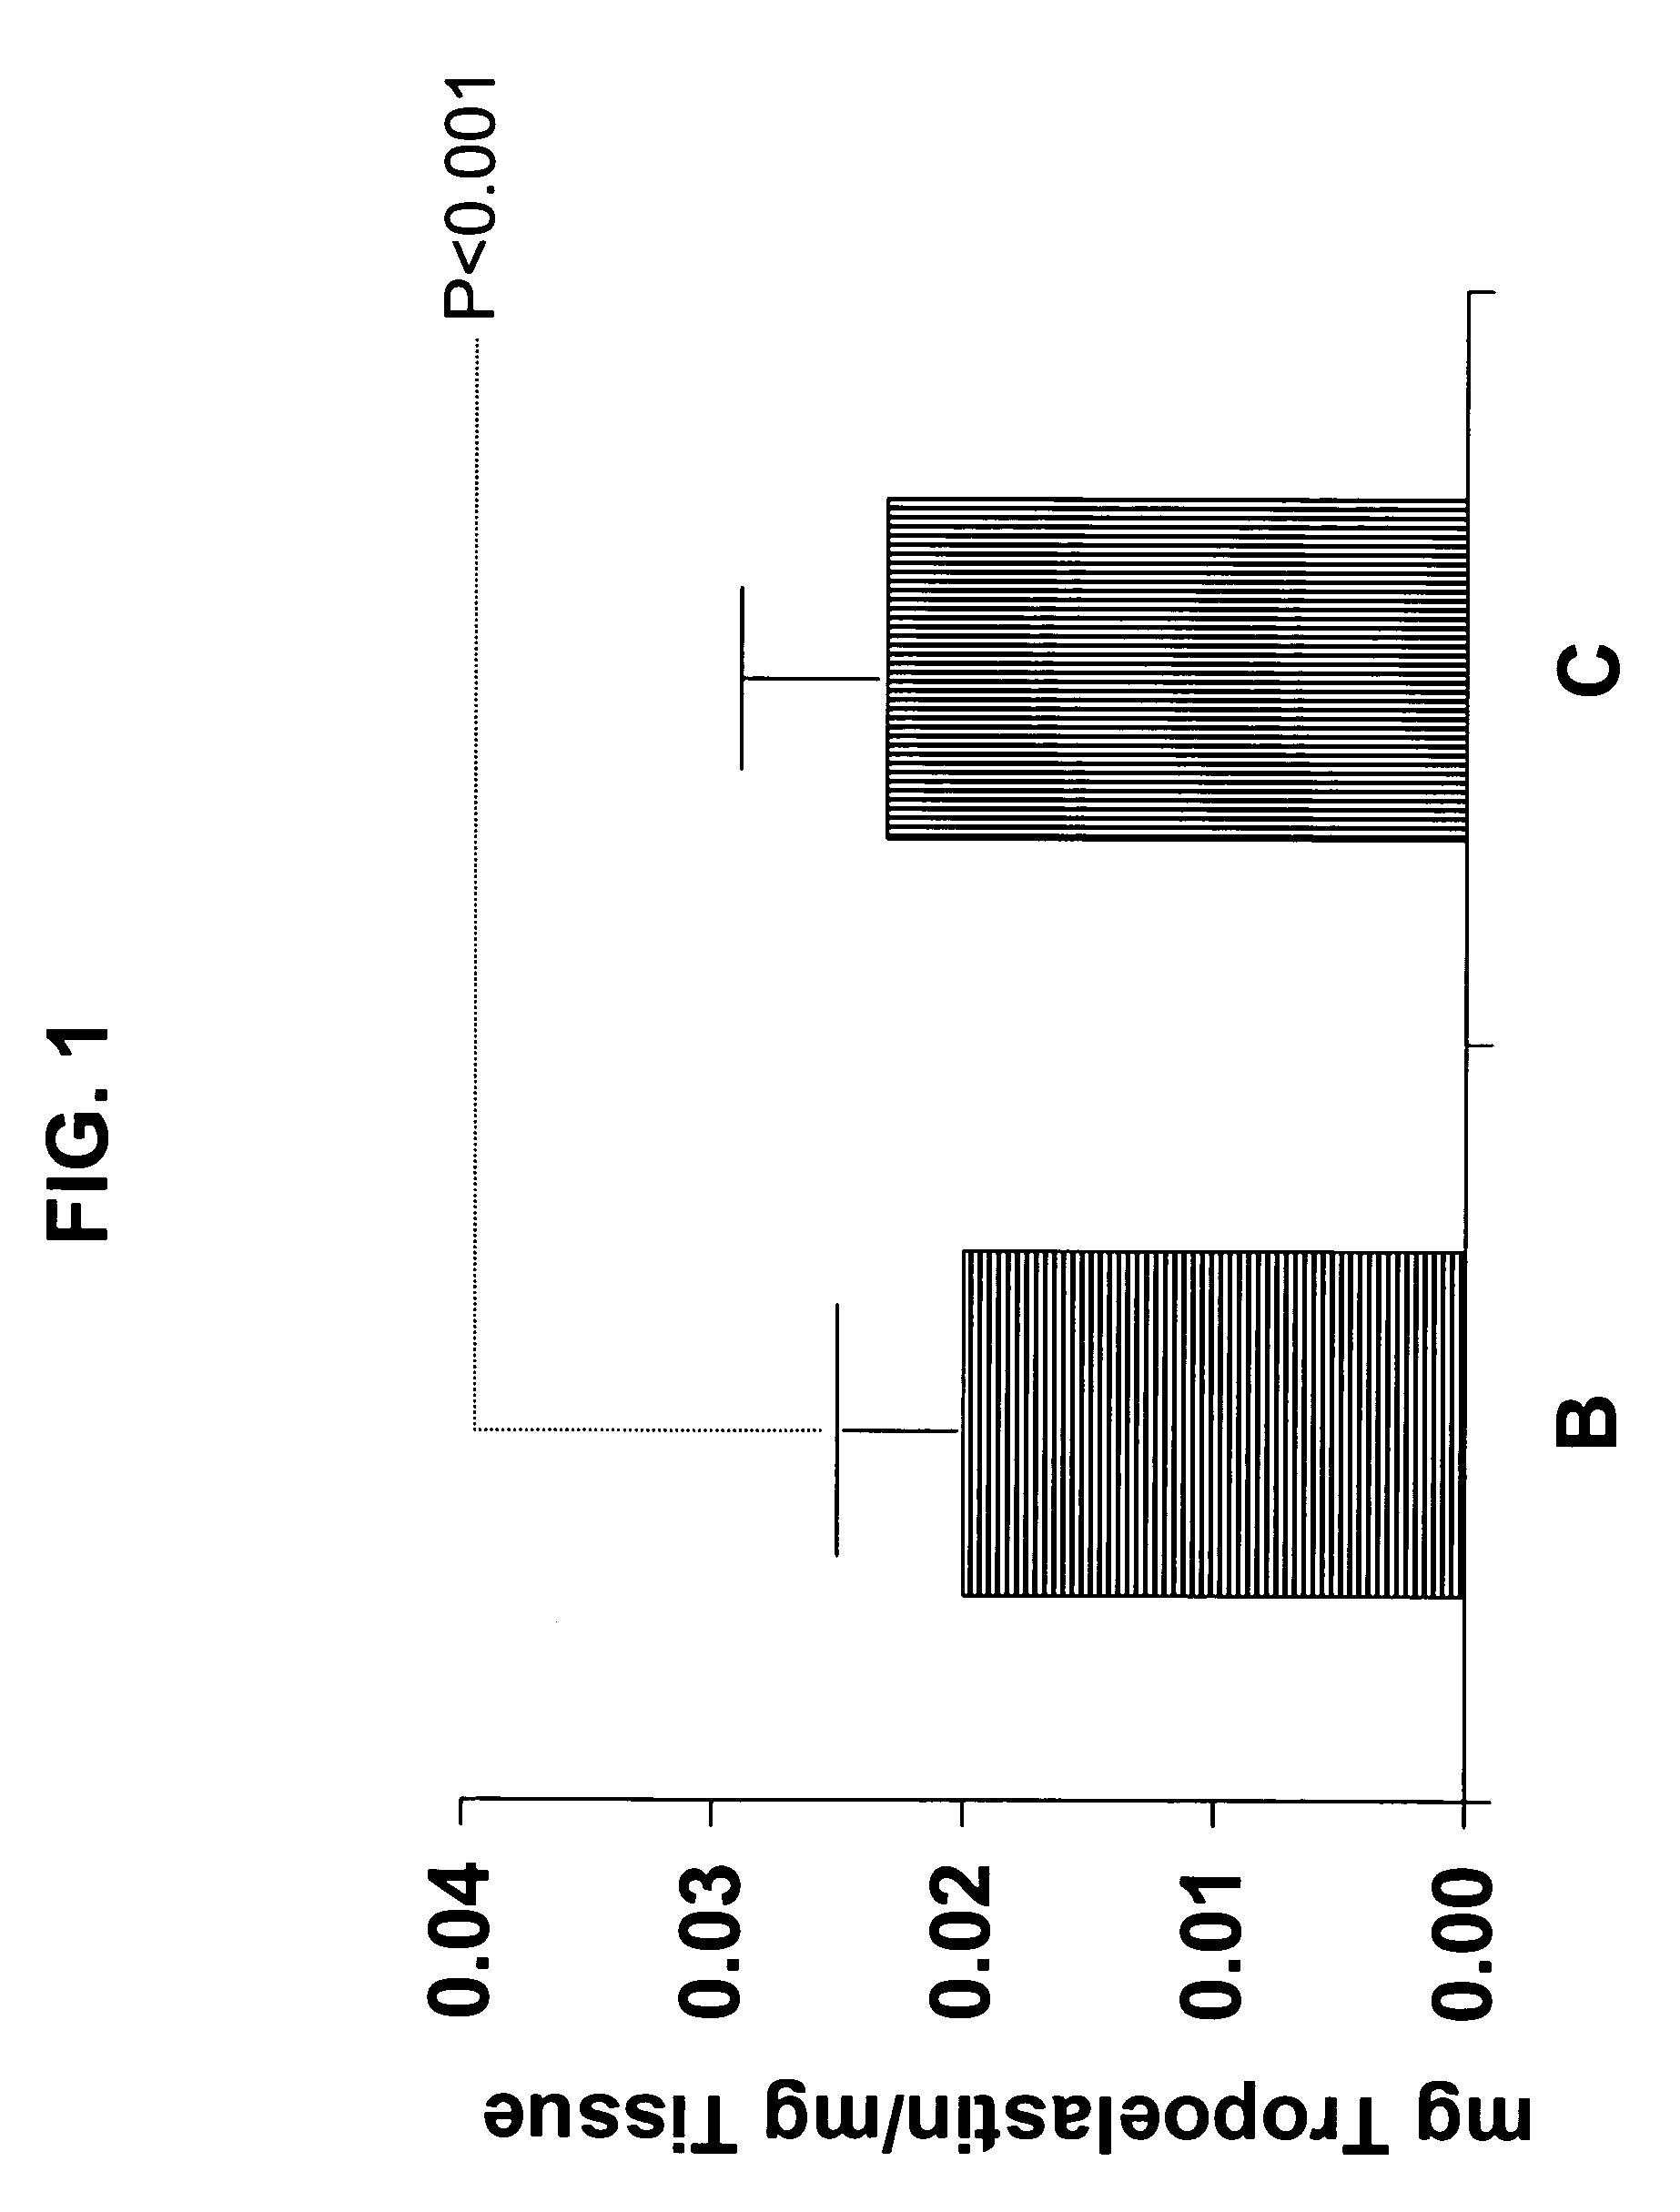 Anti-aging treatment using copper and zinc compositions